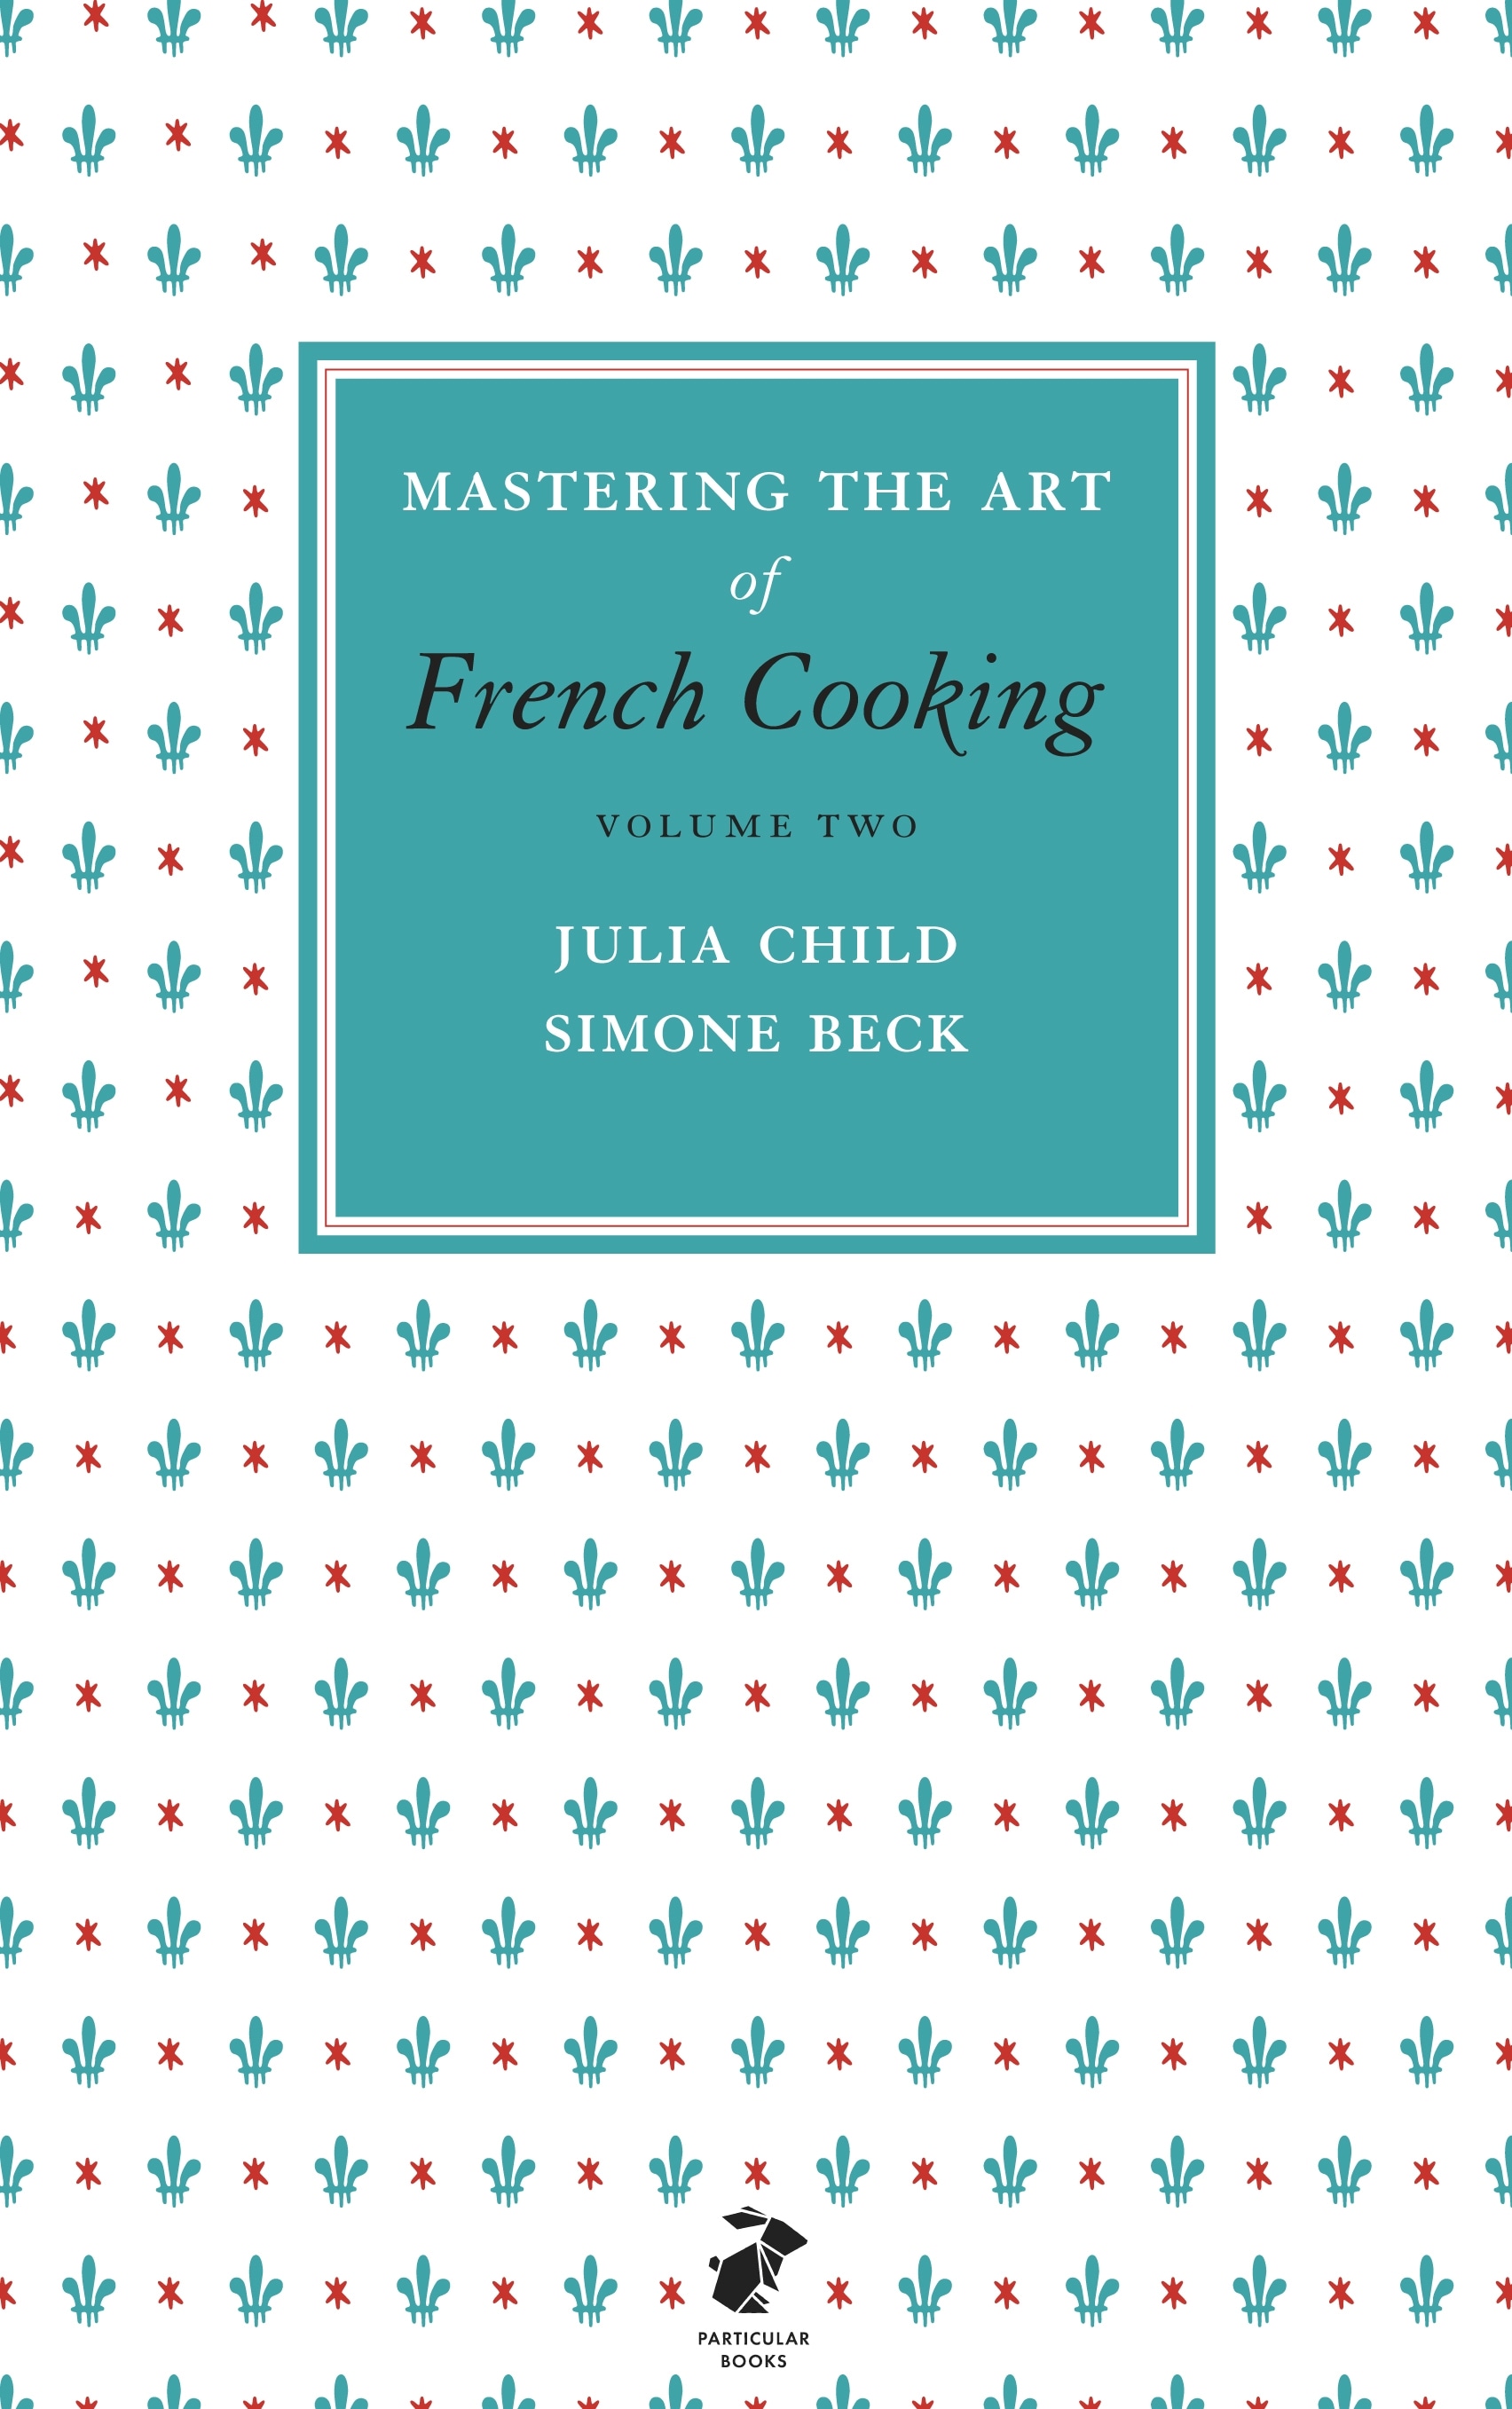 Book “Mastering the Art of French Cooking, Vol.2” by Julia Child, Simone Beck — March 3, 2011